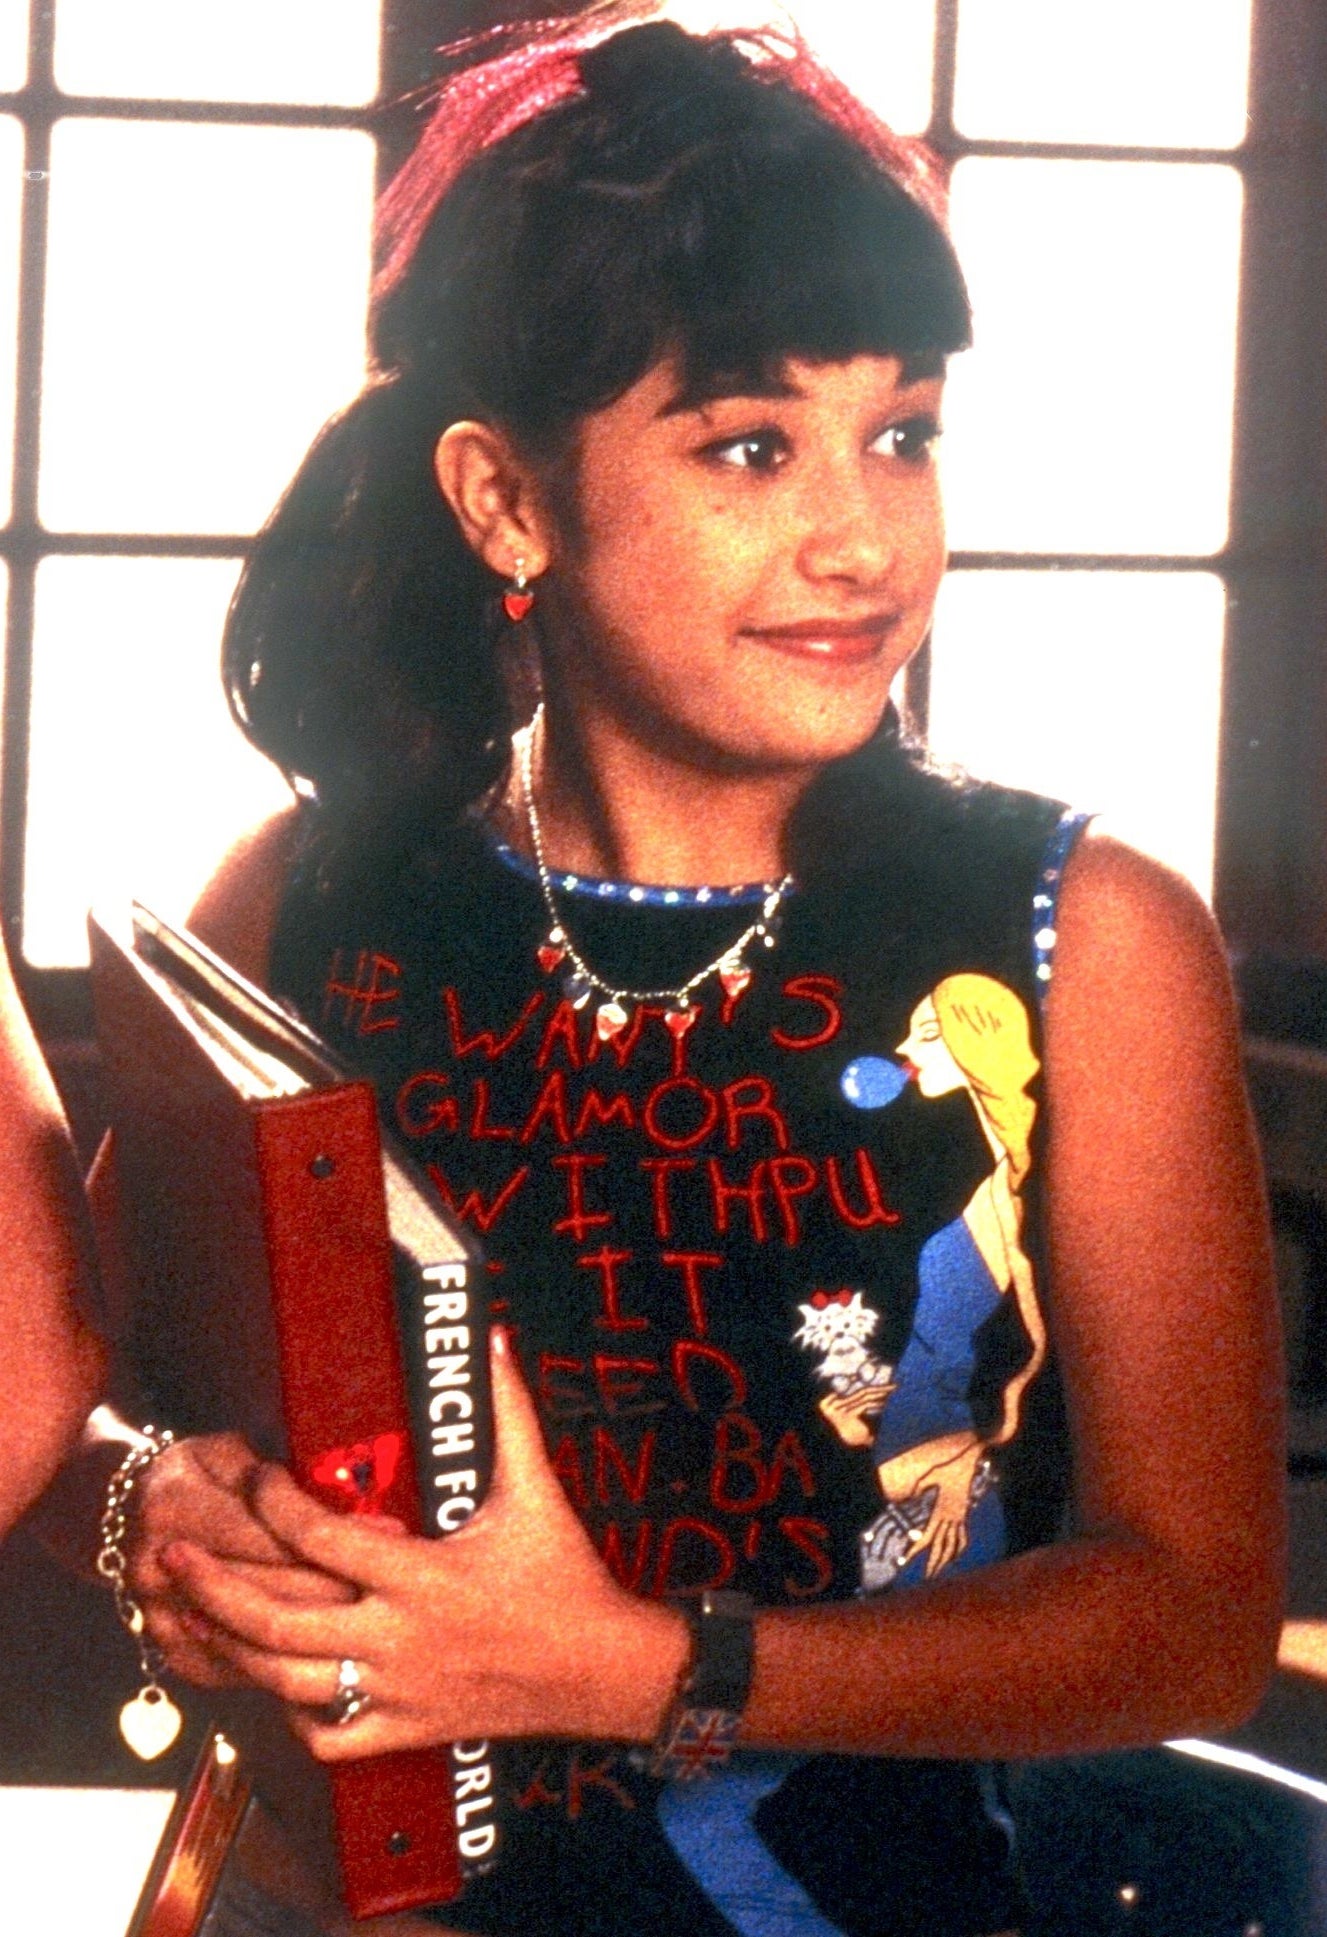 LaLaine wearing a T-shirt with writing on it